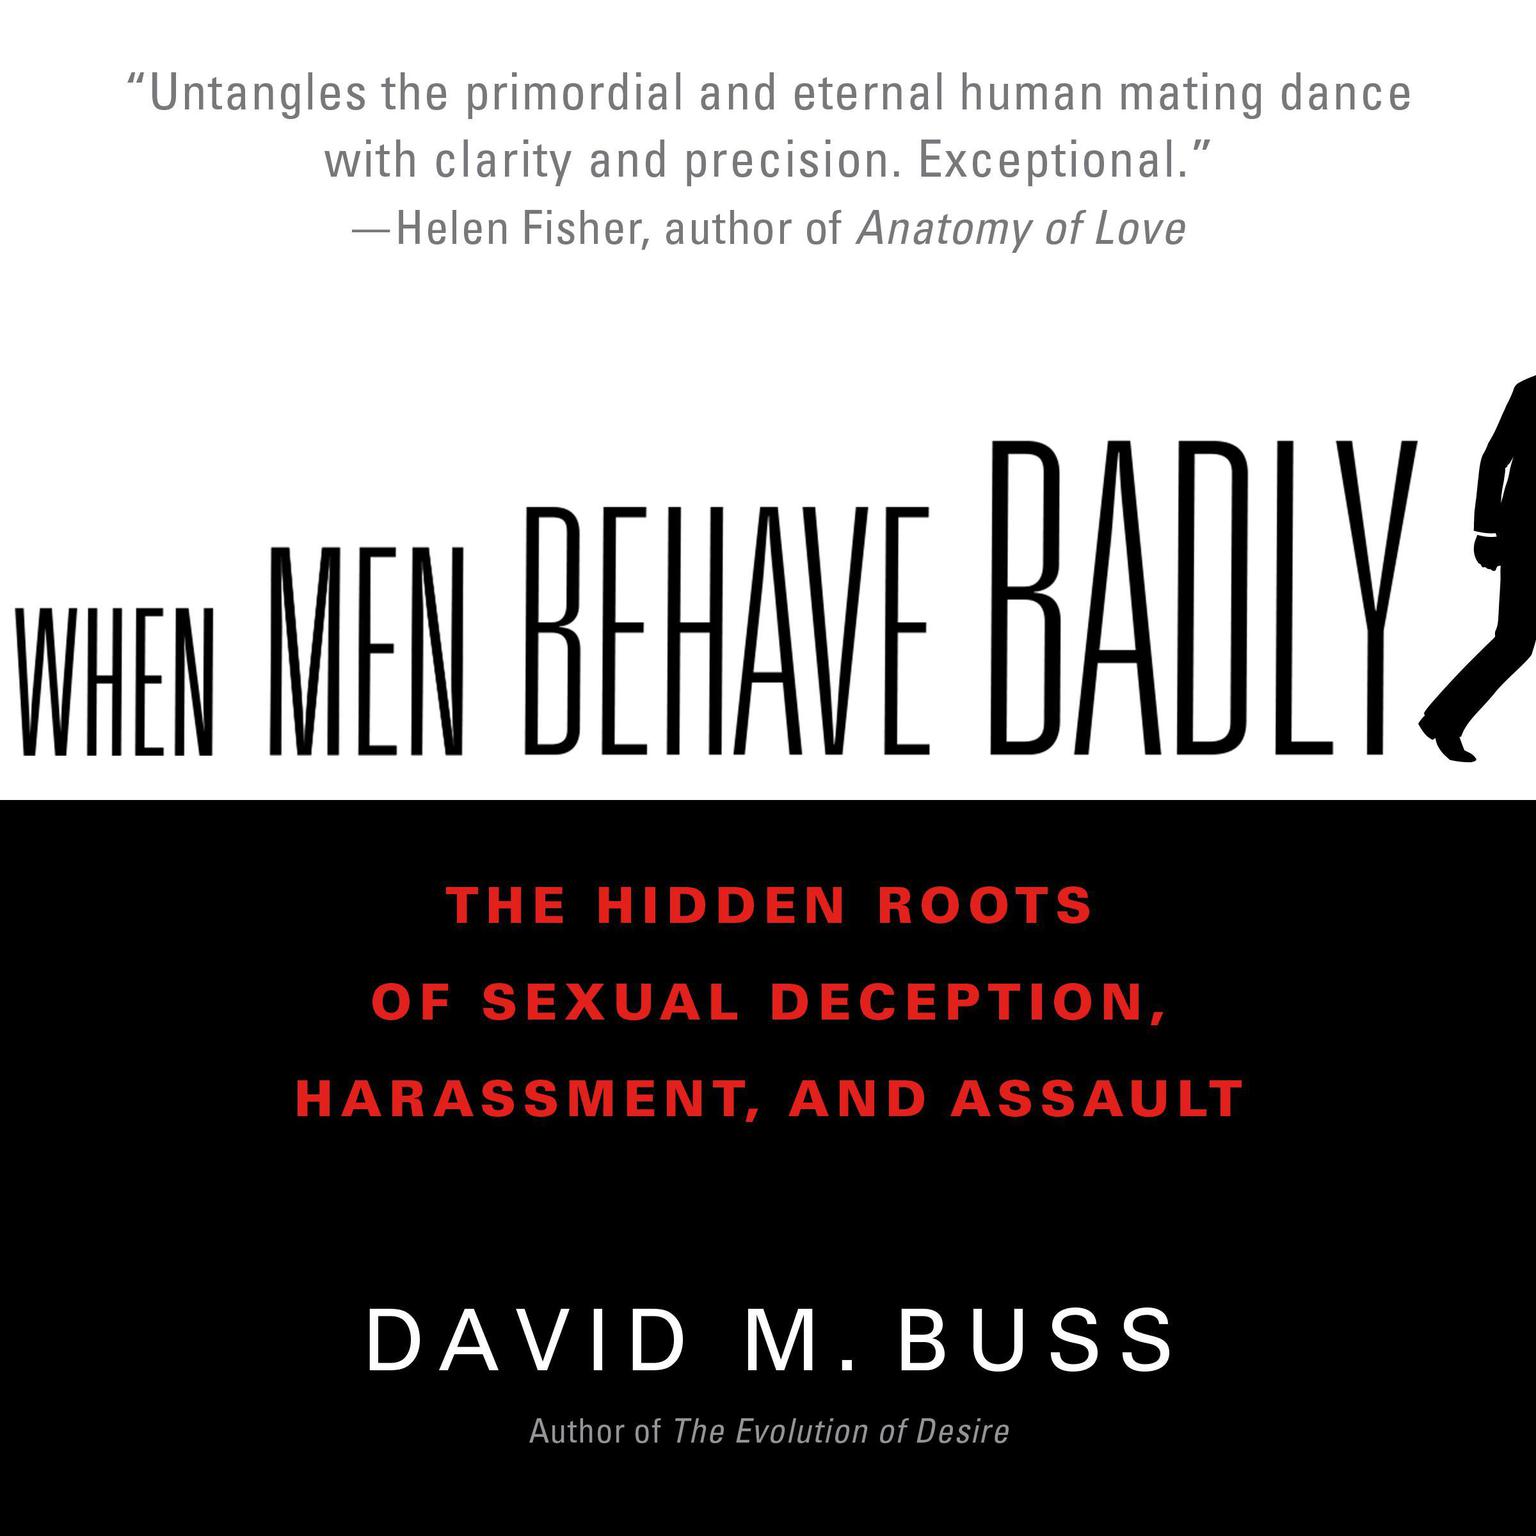 When Men Behave Badly: The Hidden Roots of Sexual Deception, Harassment, and Assault Audiobook, by David M. Buss